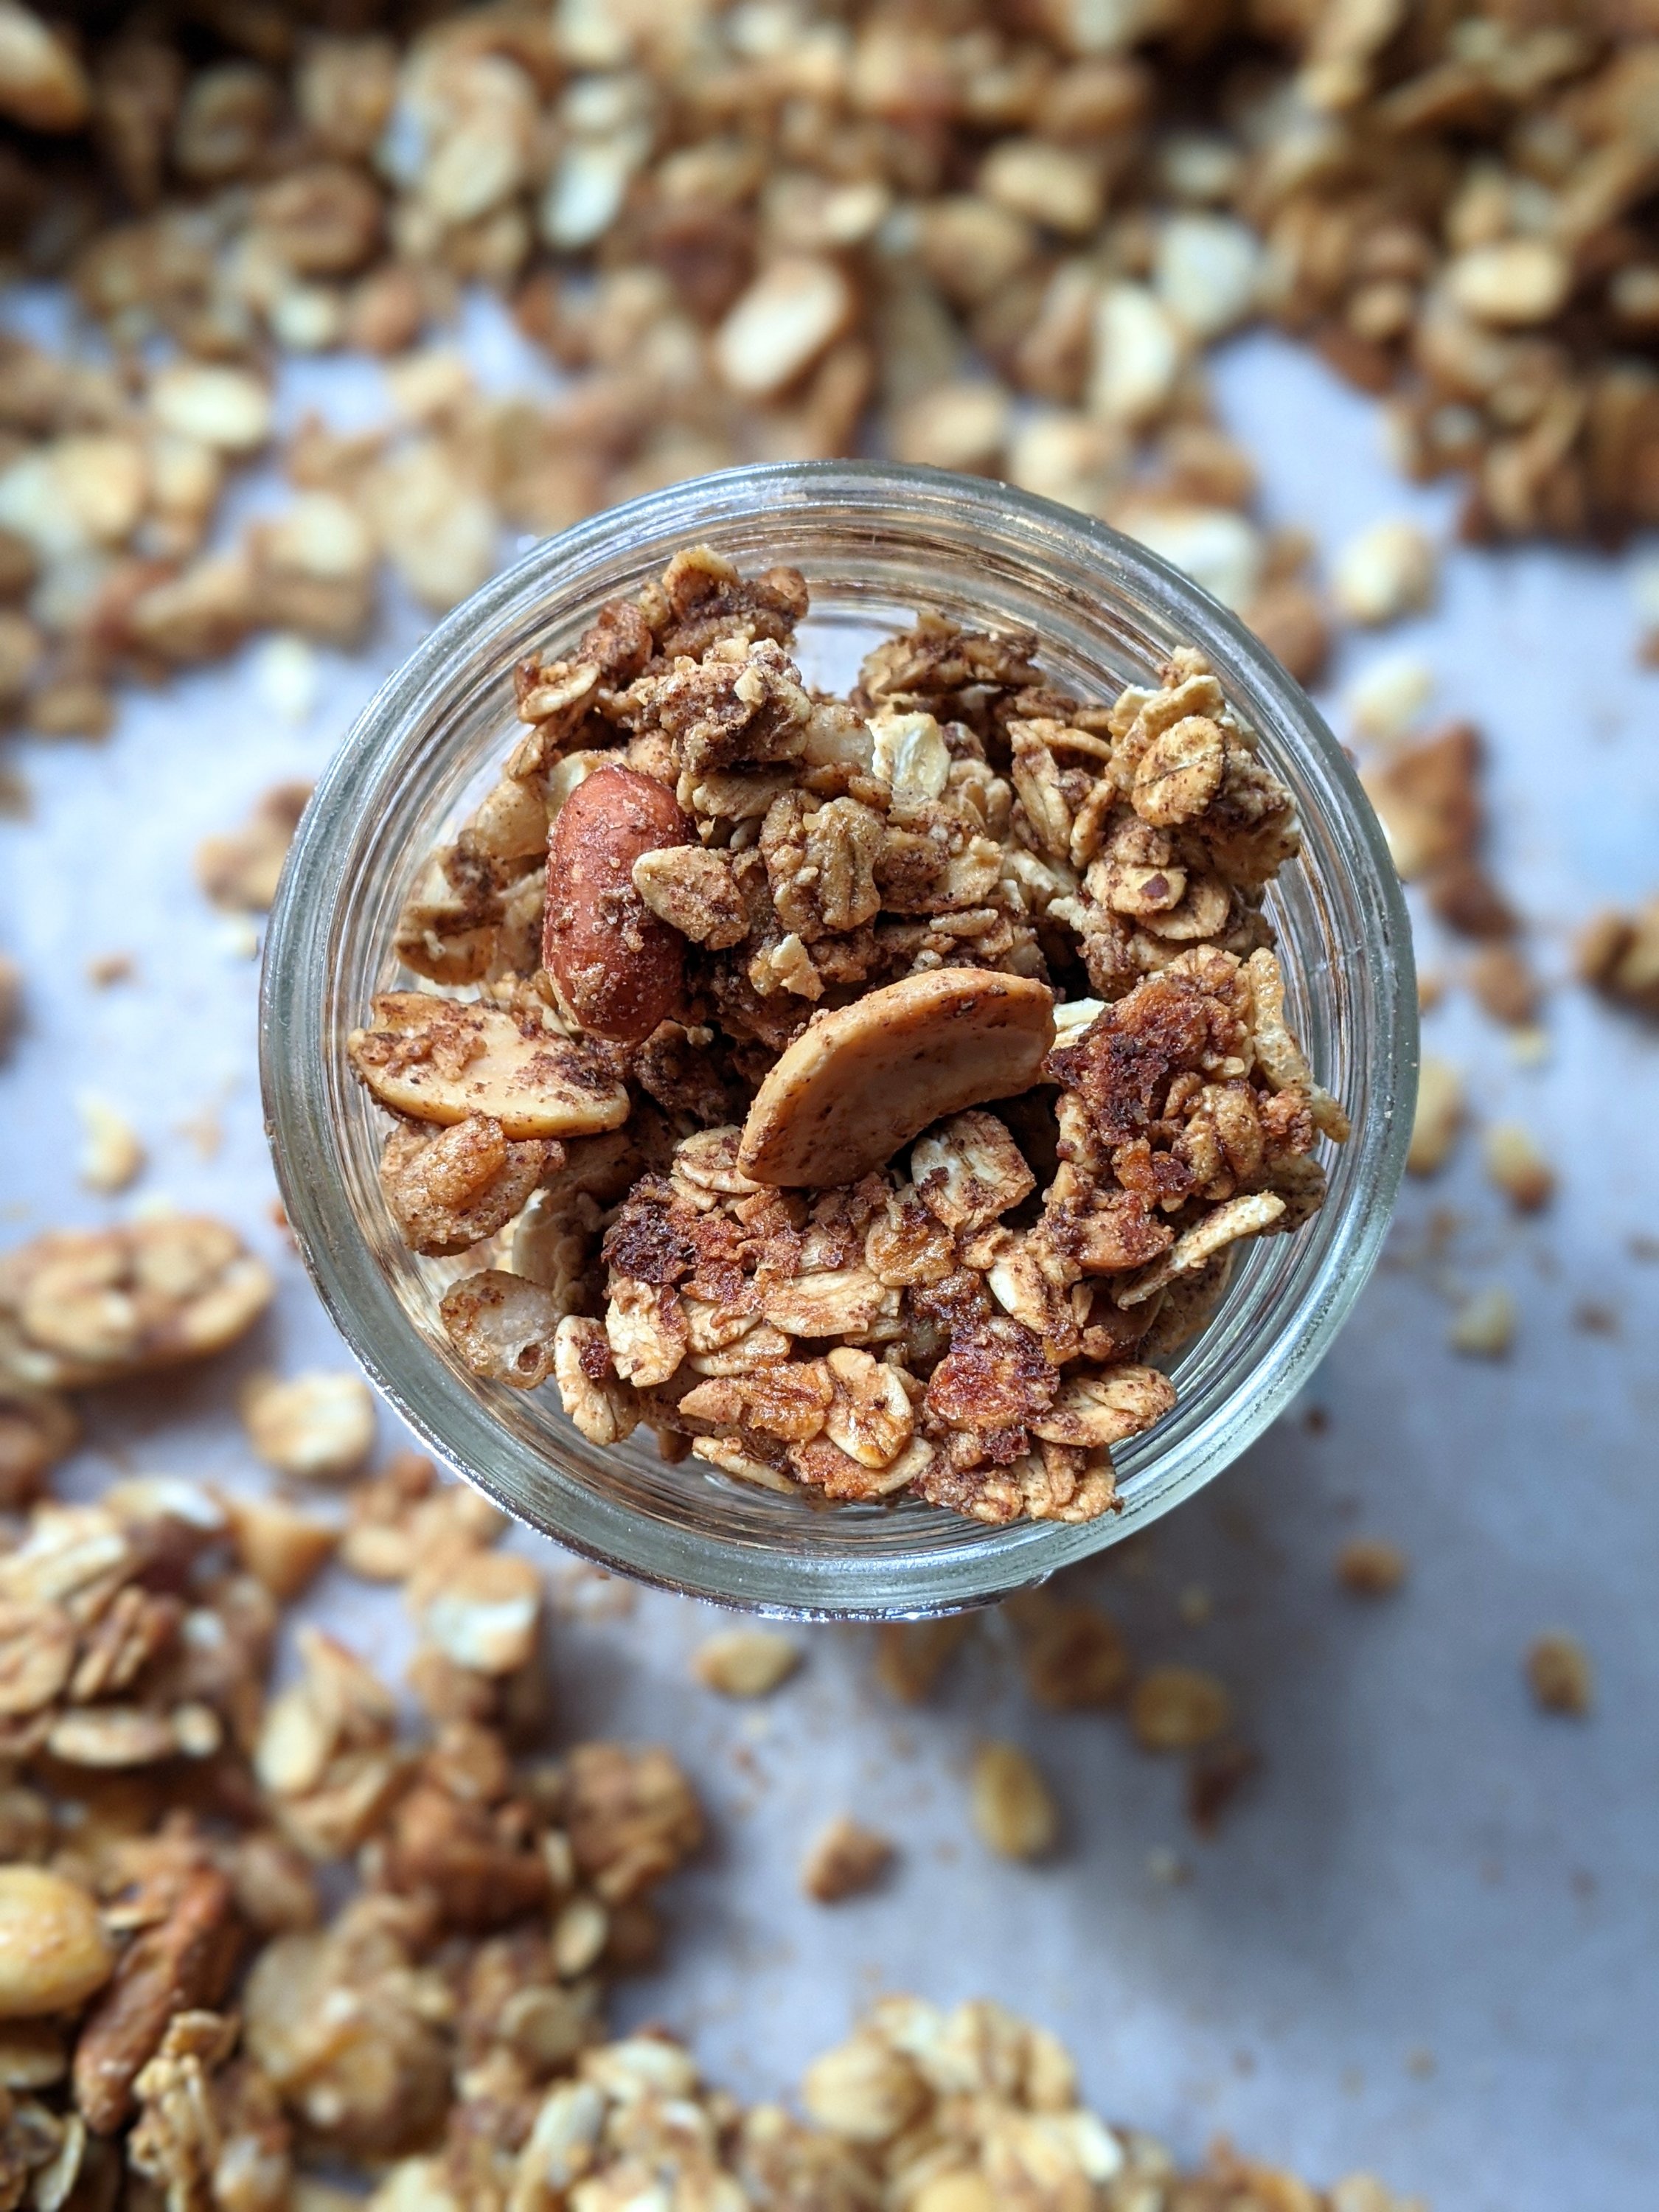 cinnamon granola with almonds and maple syrup homemade cinnamon crunch granola recipe with cashews peanuts almonds walnuts healthy fats for breakfast recipe for yogurt bowls or smoothies or top oatmeal with granola recipe veganuary meatless breakfasts and brunches